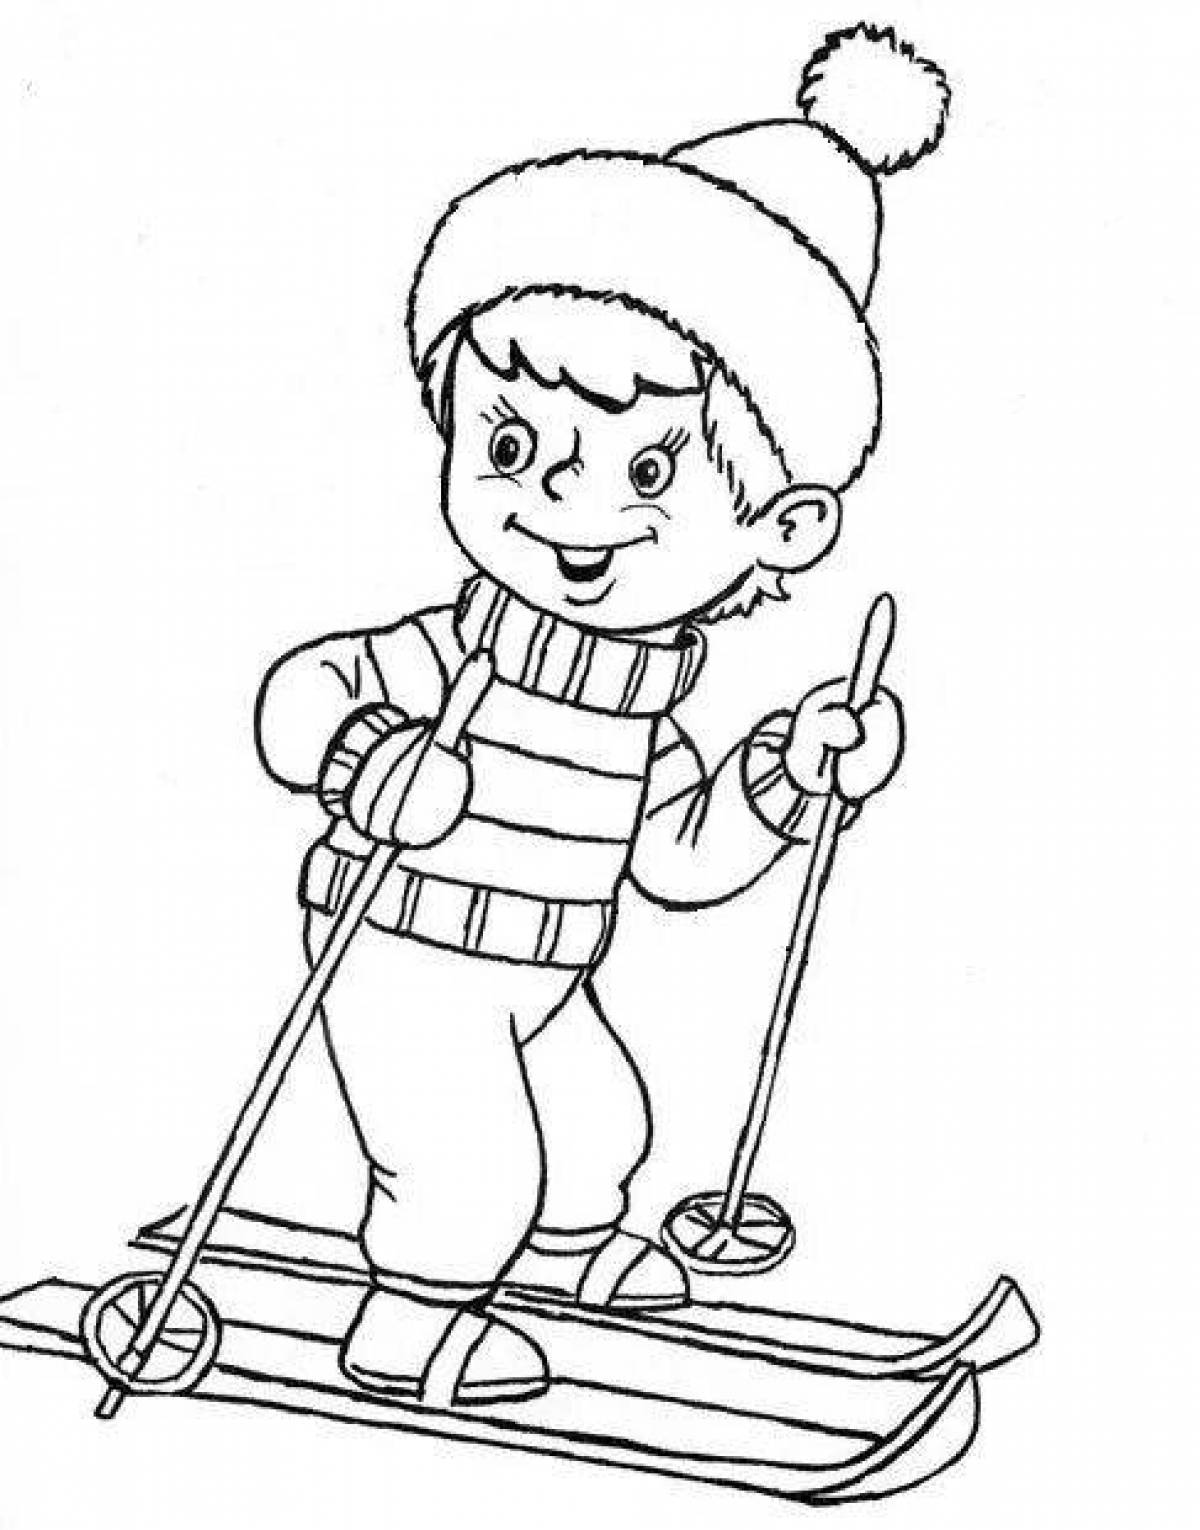 Coloring page confident skiing boy